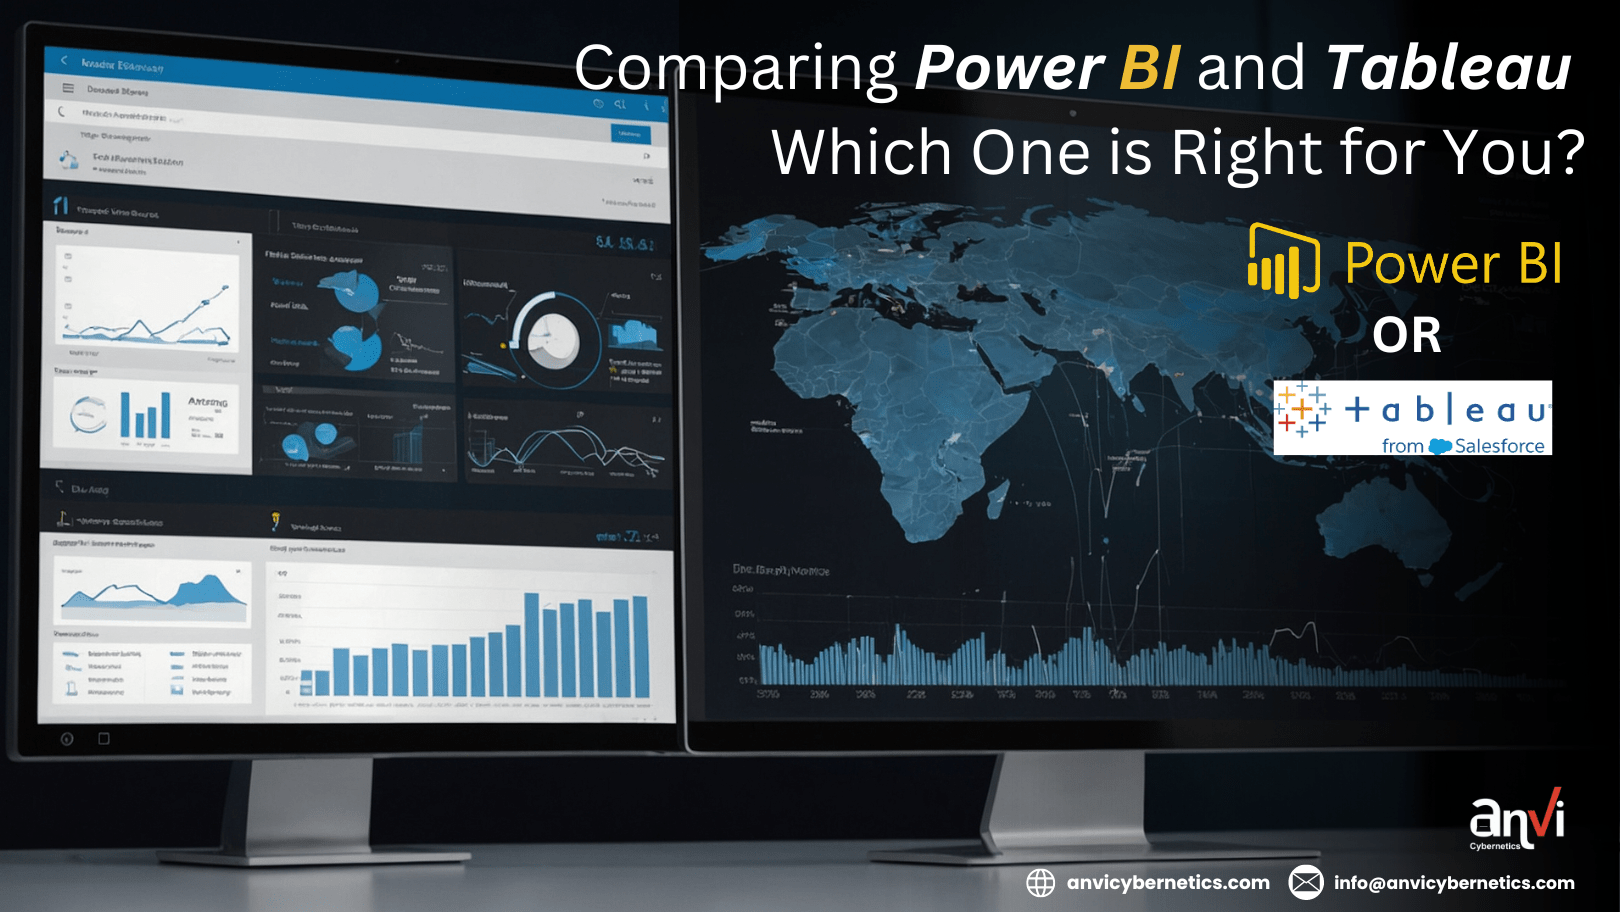 Comparing Power BI and Tableau: Which One is Right for You?